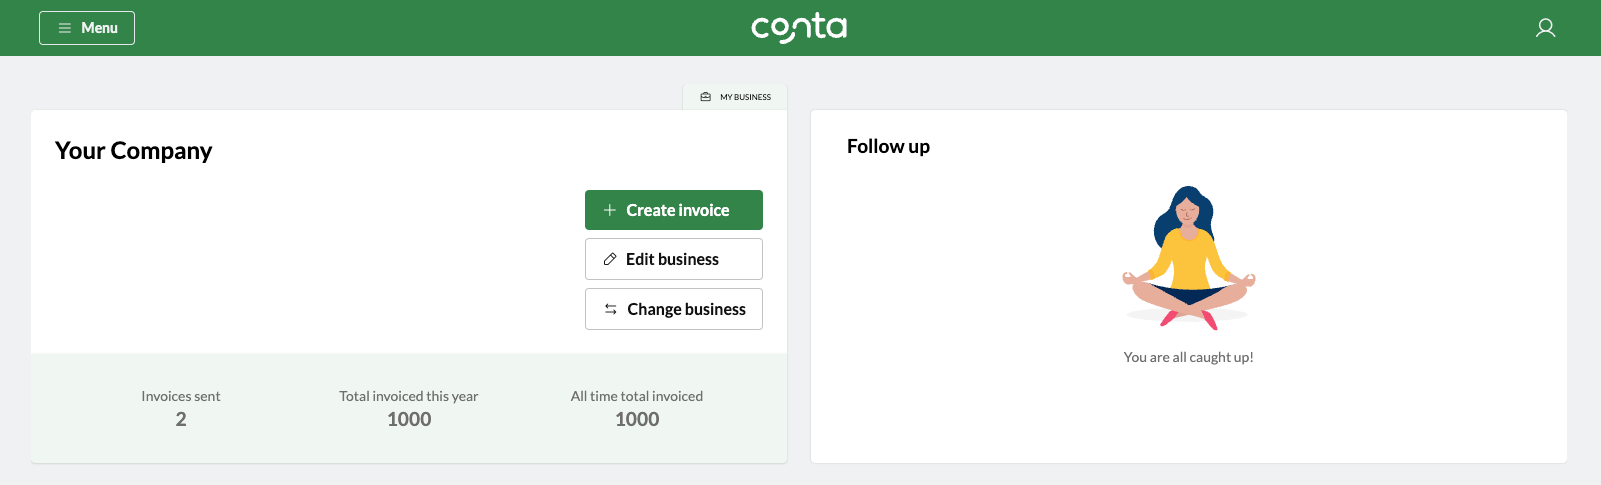 The homepage in Conta showing company information, statistics for your company and invoices that you need to follow up on.